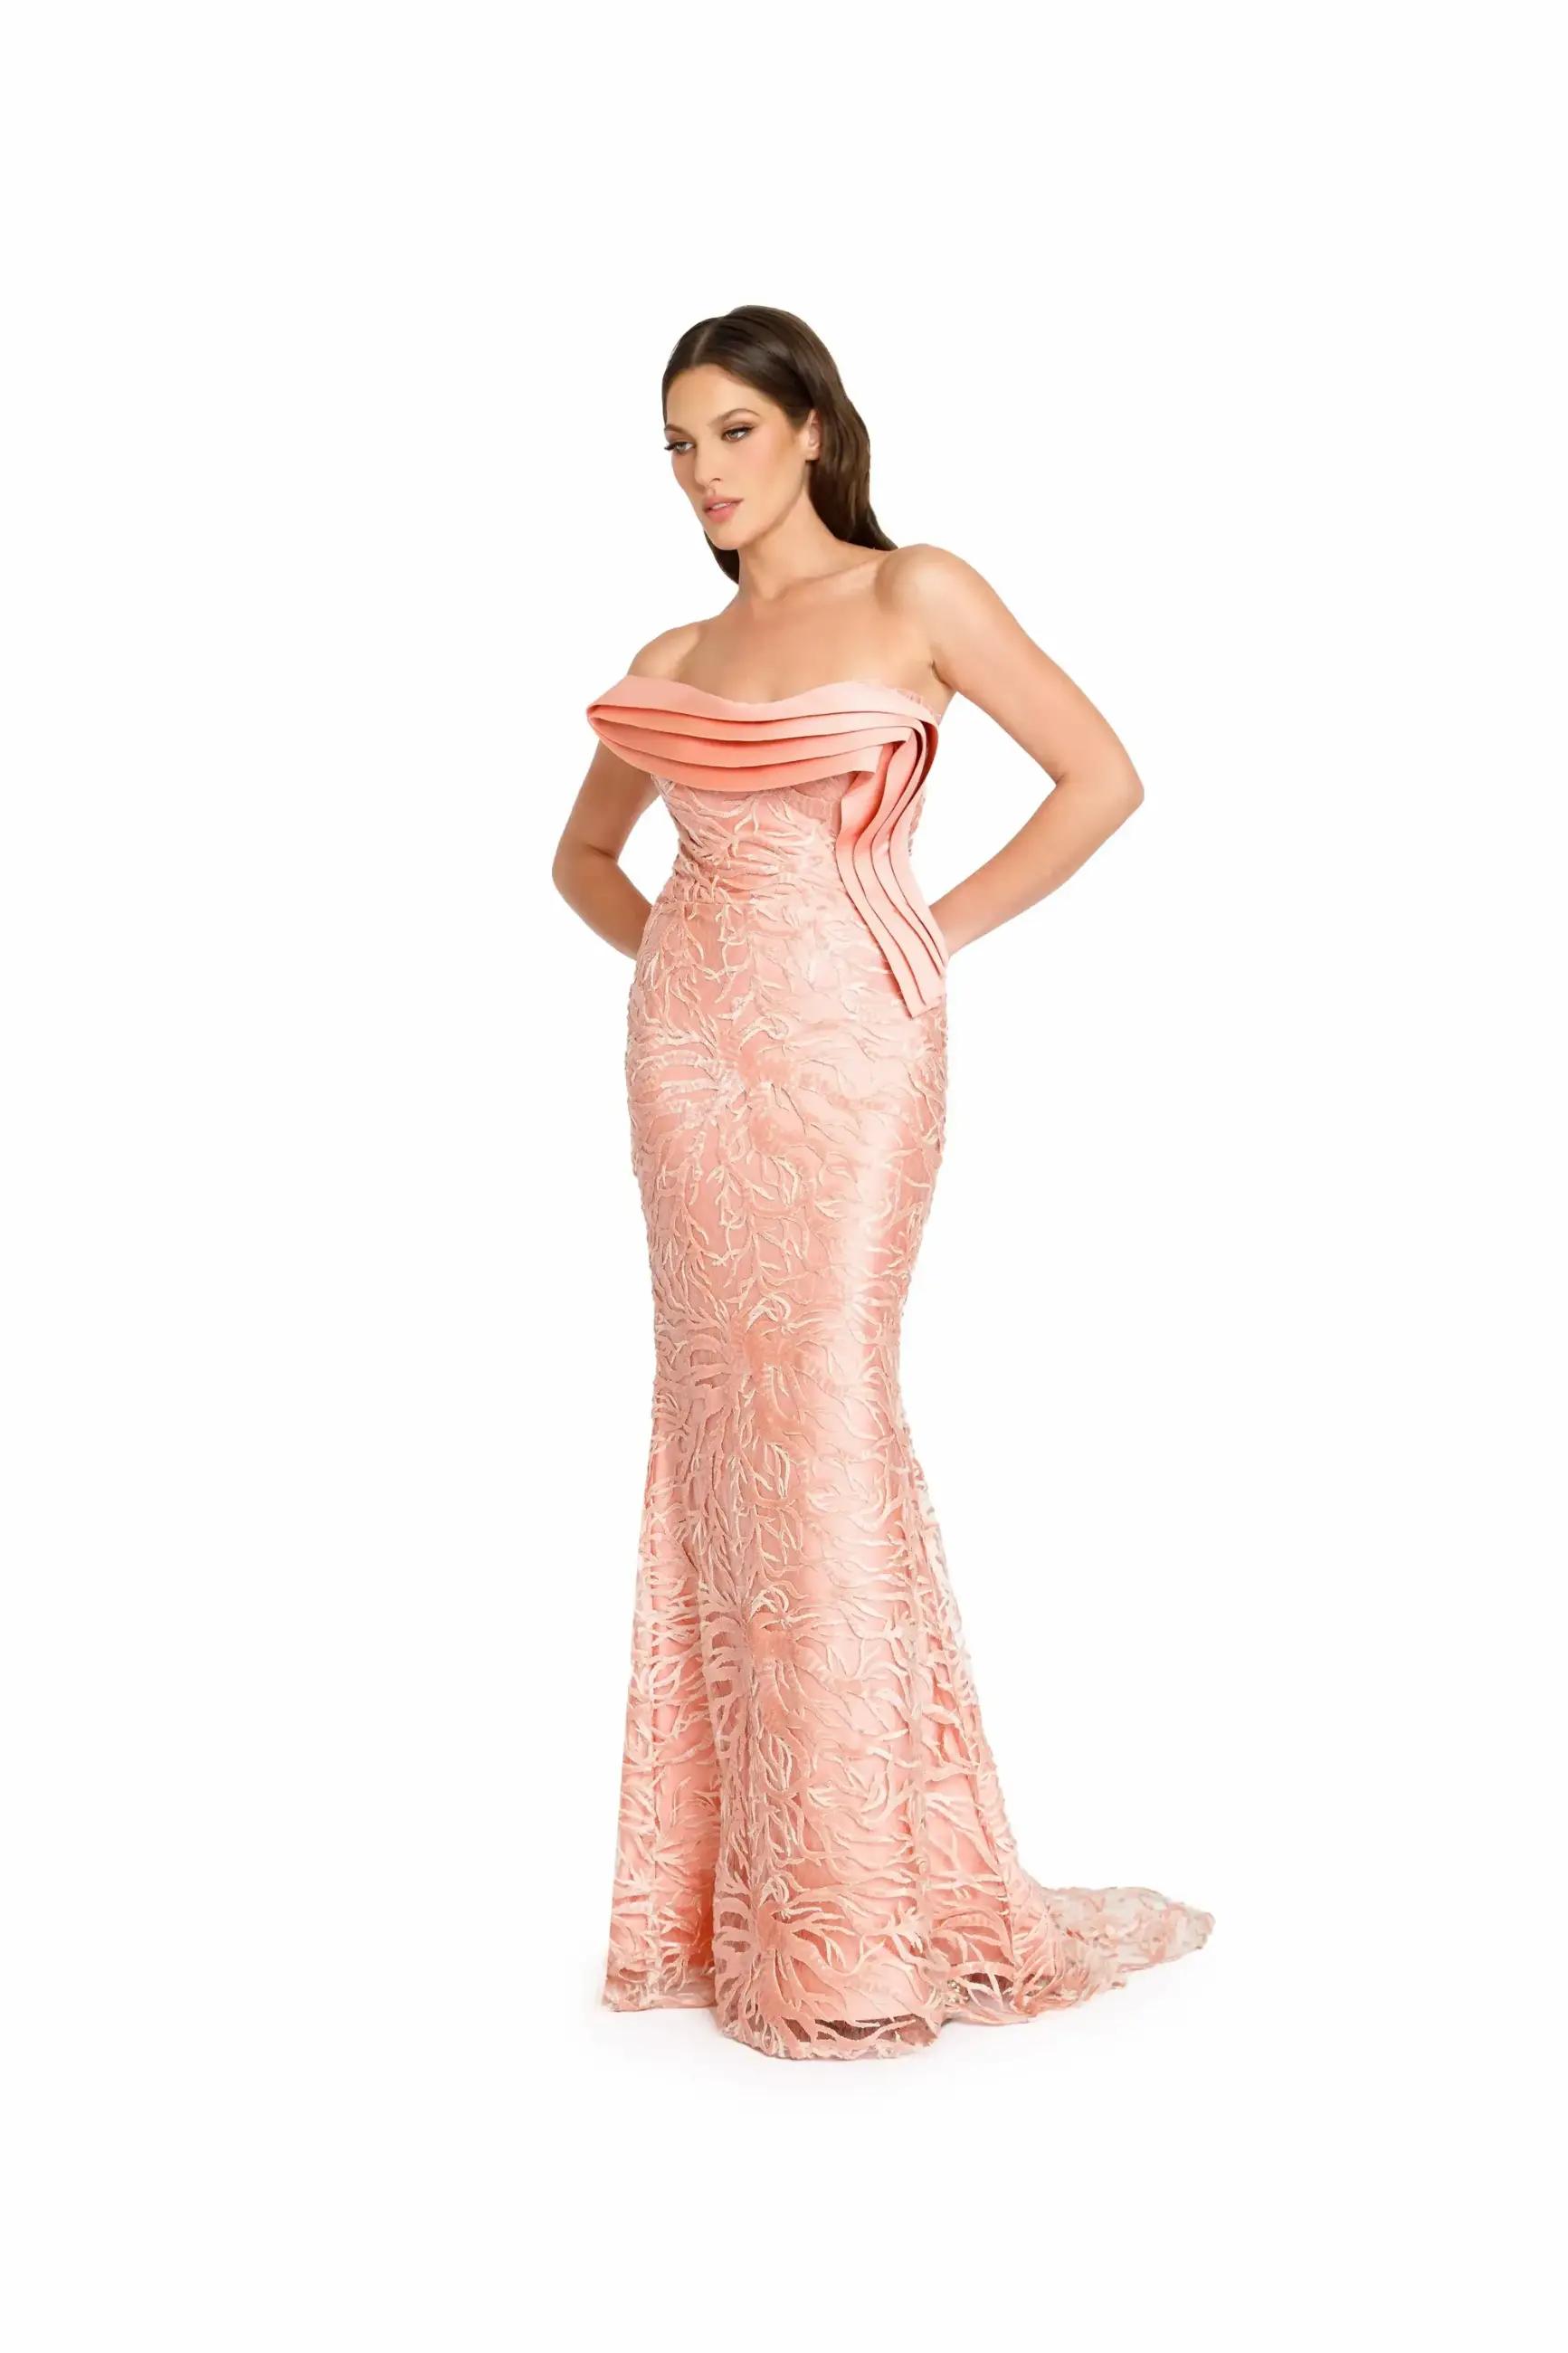 Model wearing a pink evening gown